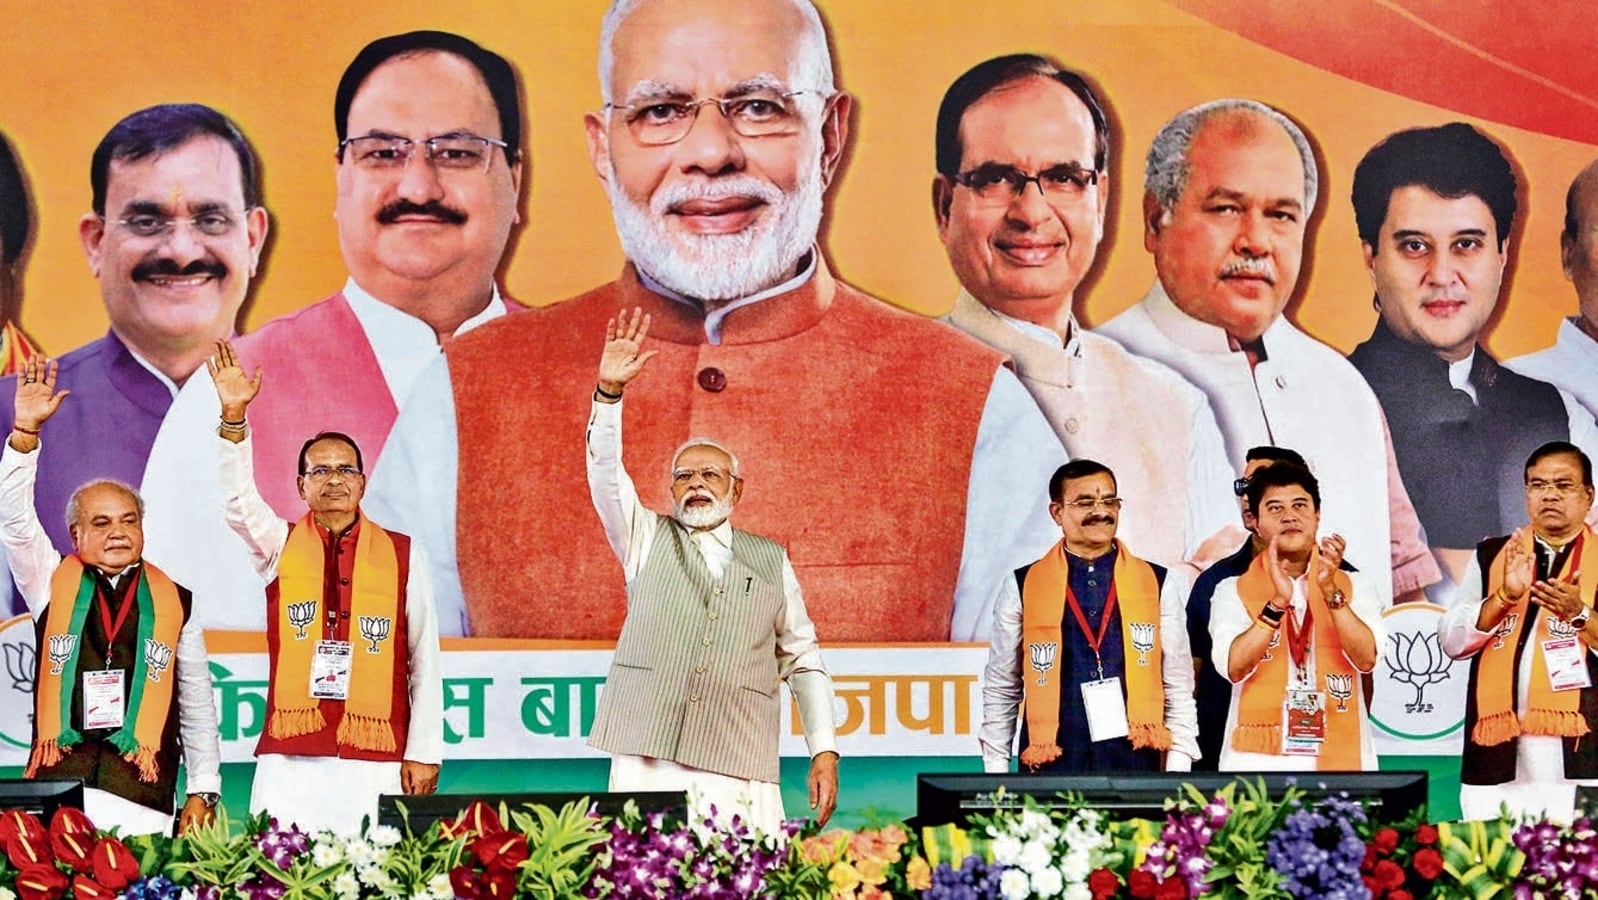 General election in sight, NDA in focus